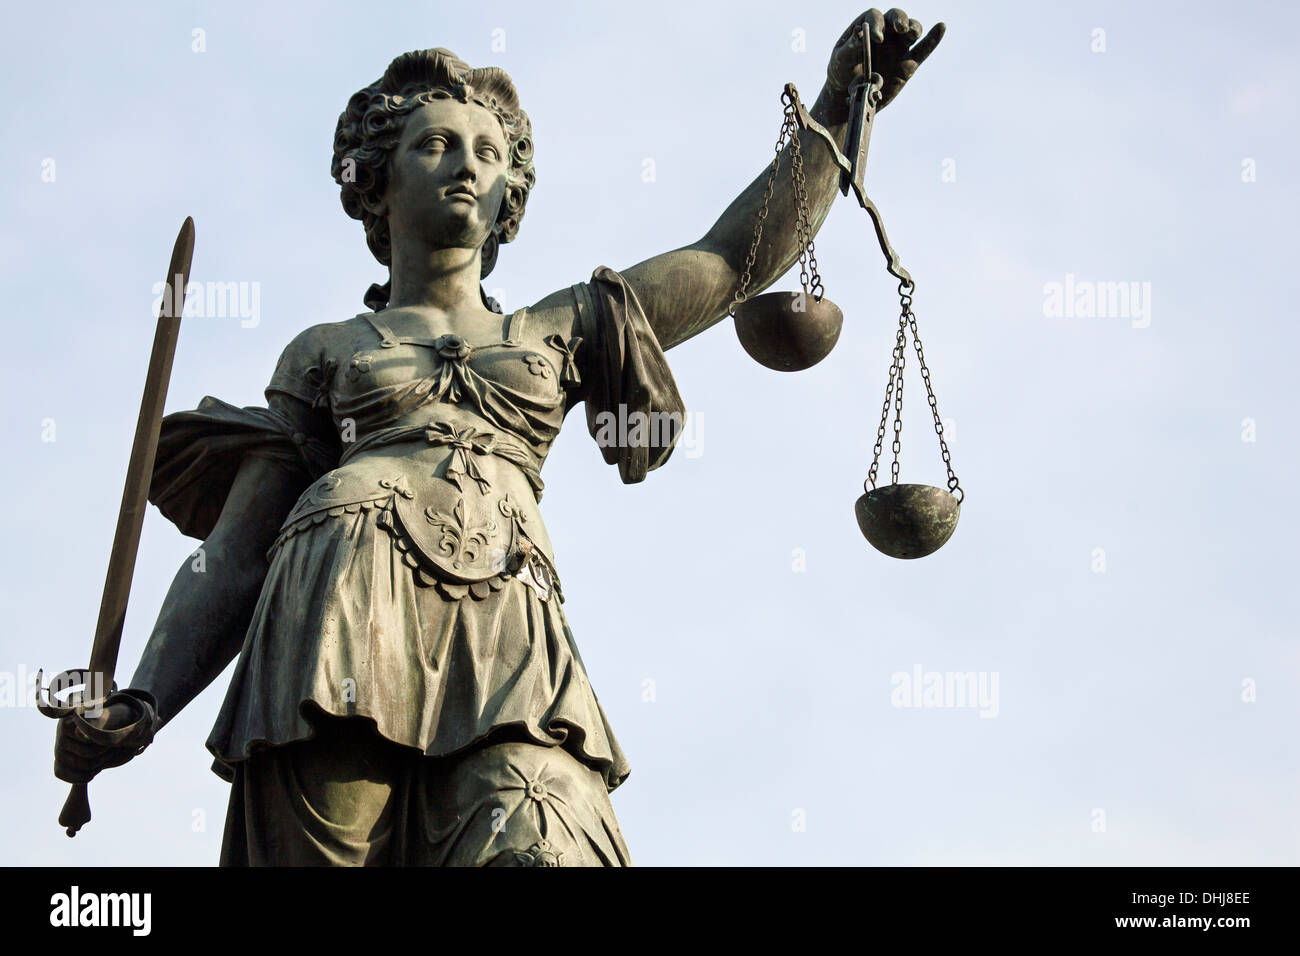 Sculpture of Lady Justice, Justitia on the Römerplatz in Frankrfurt am Main, Germany Stock Photo